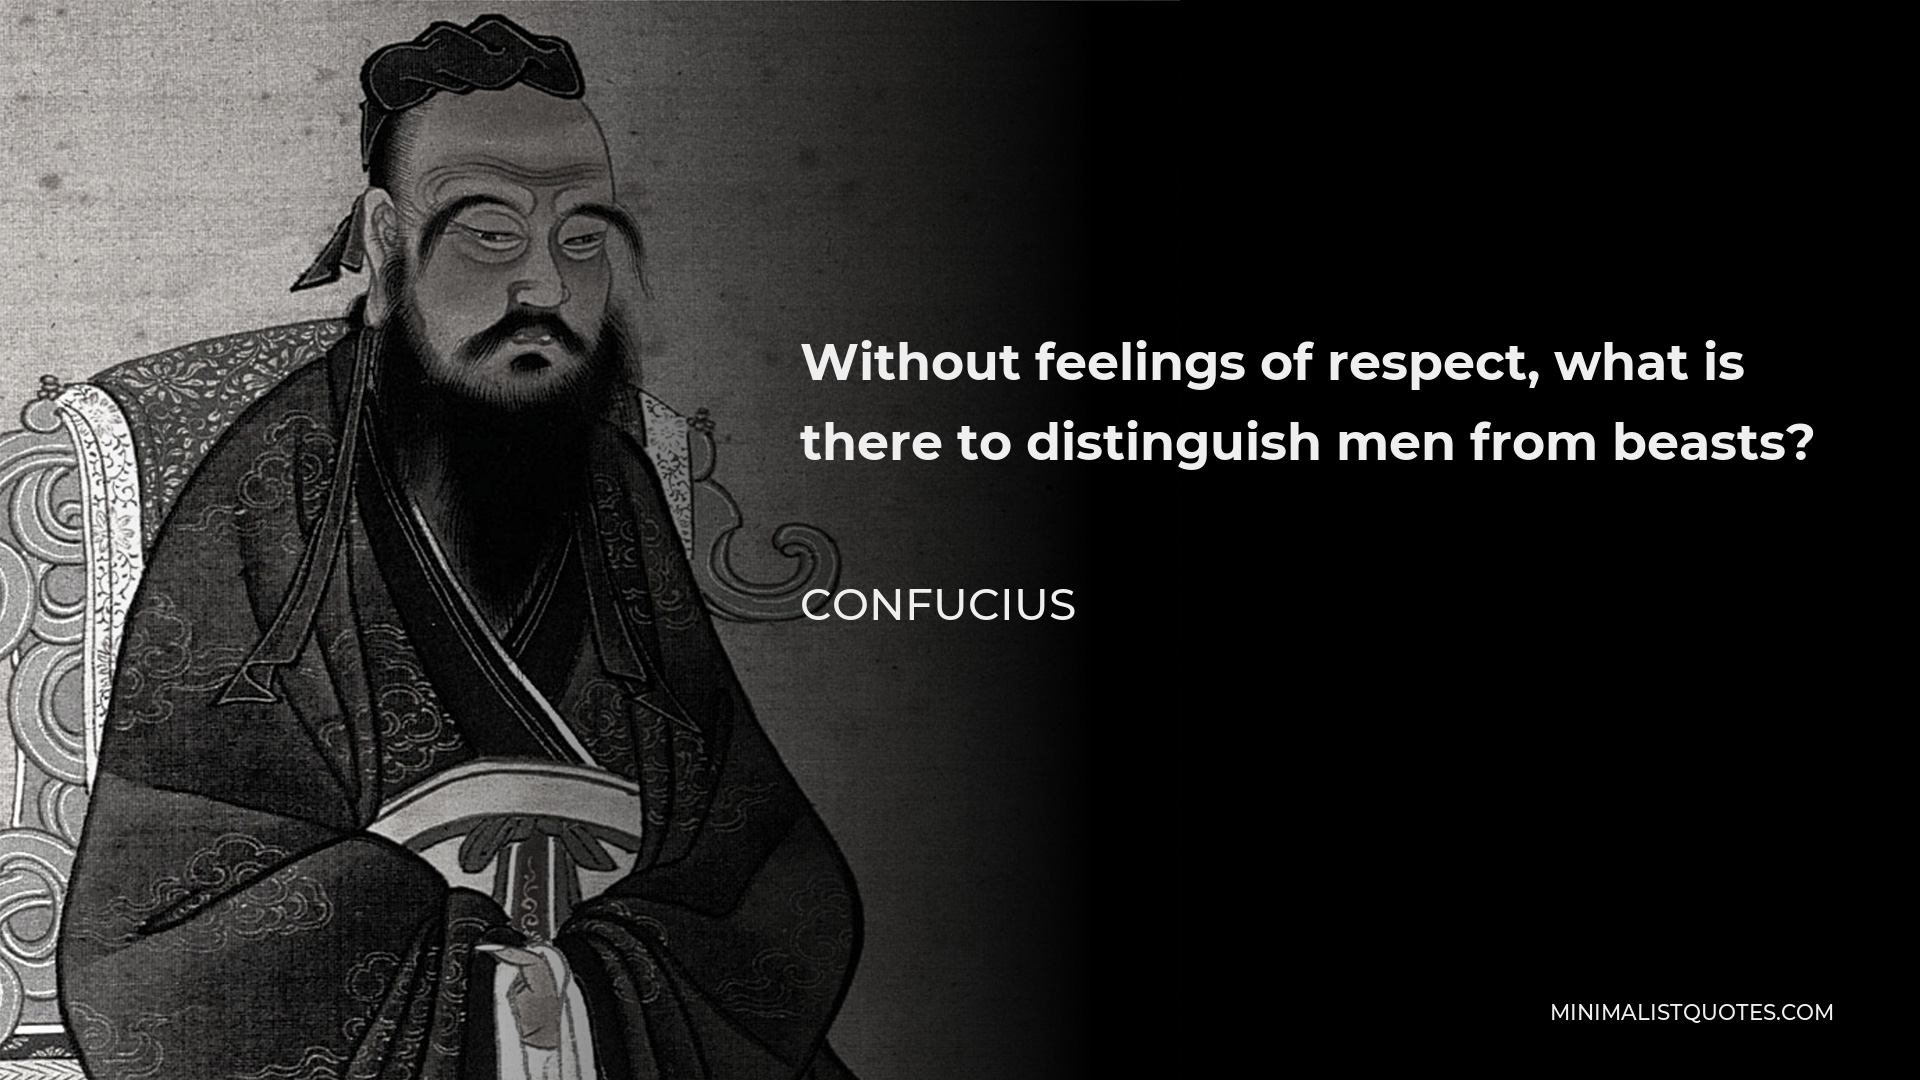 Confucius Quote - Without feelings of respect, what is there to distinguish men from beasts?